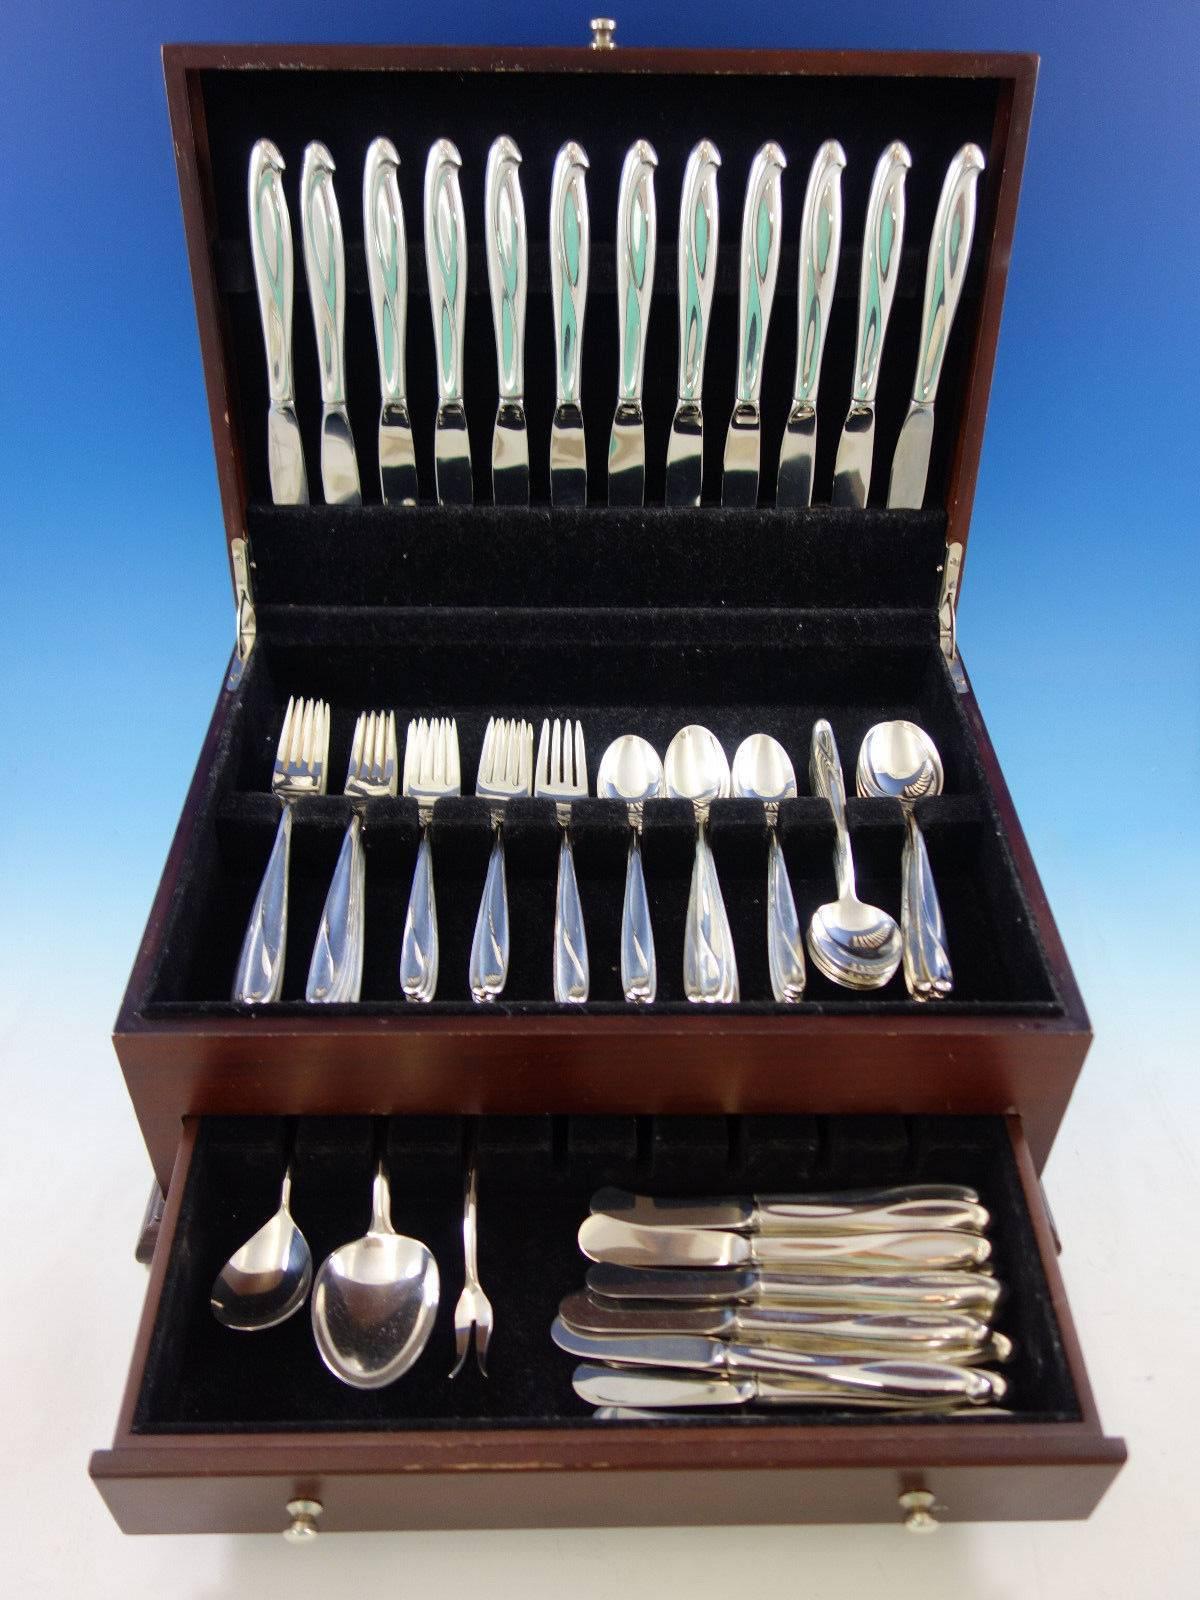 Silver sculpture by Reed and Barton sterling silver flatware set, 77 pieces. This set includes: 

12 knives, 9